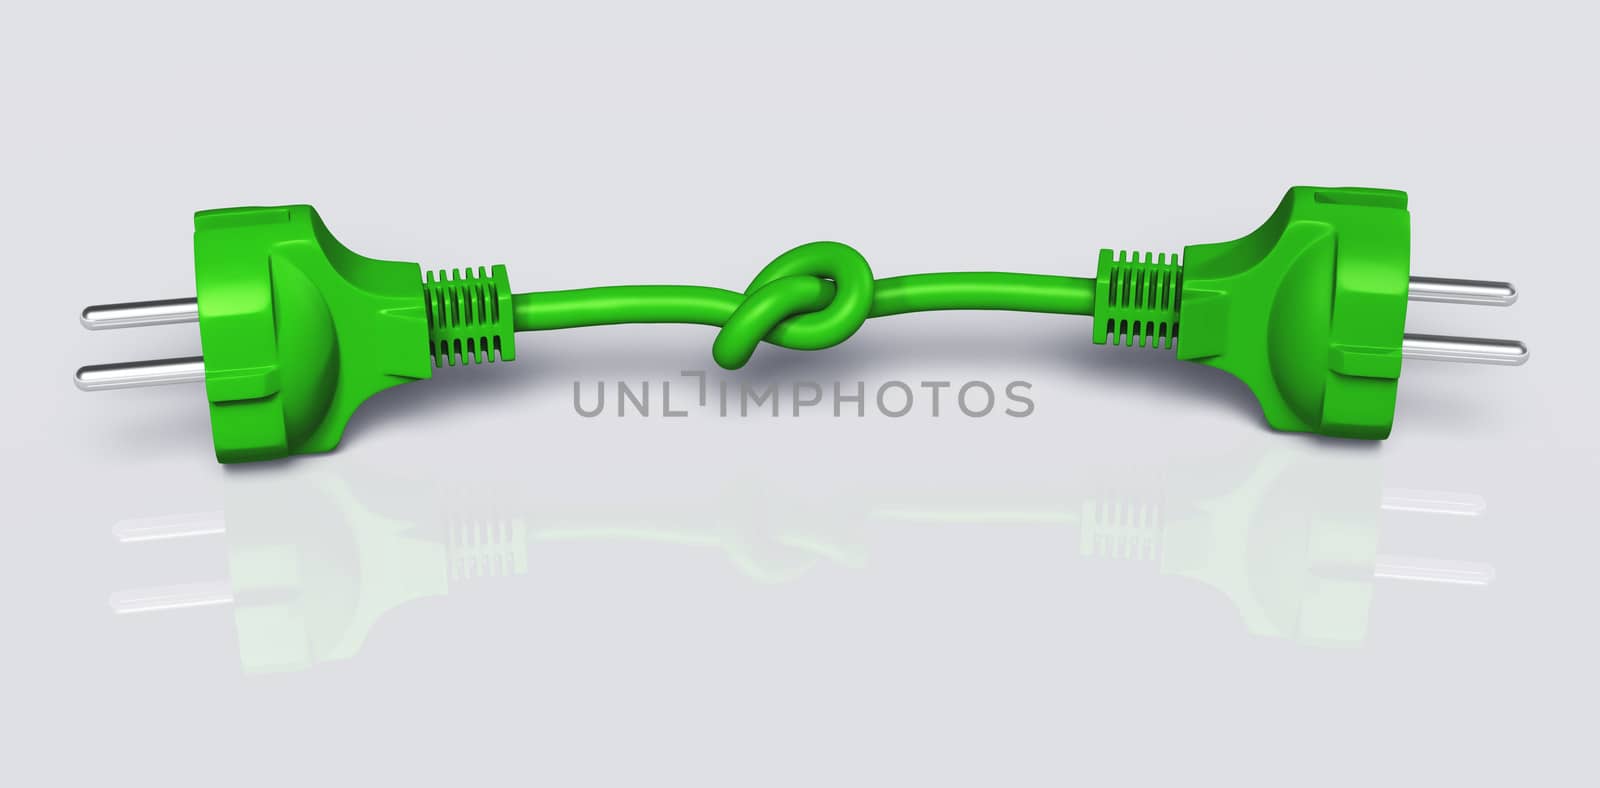 two ecological green plugs are connected by one green knotted cable on a white background